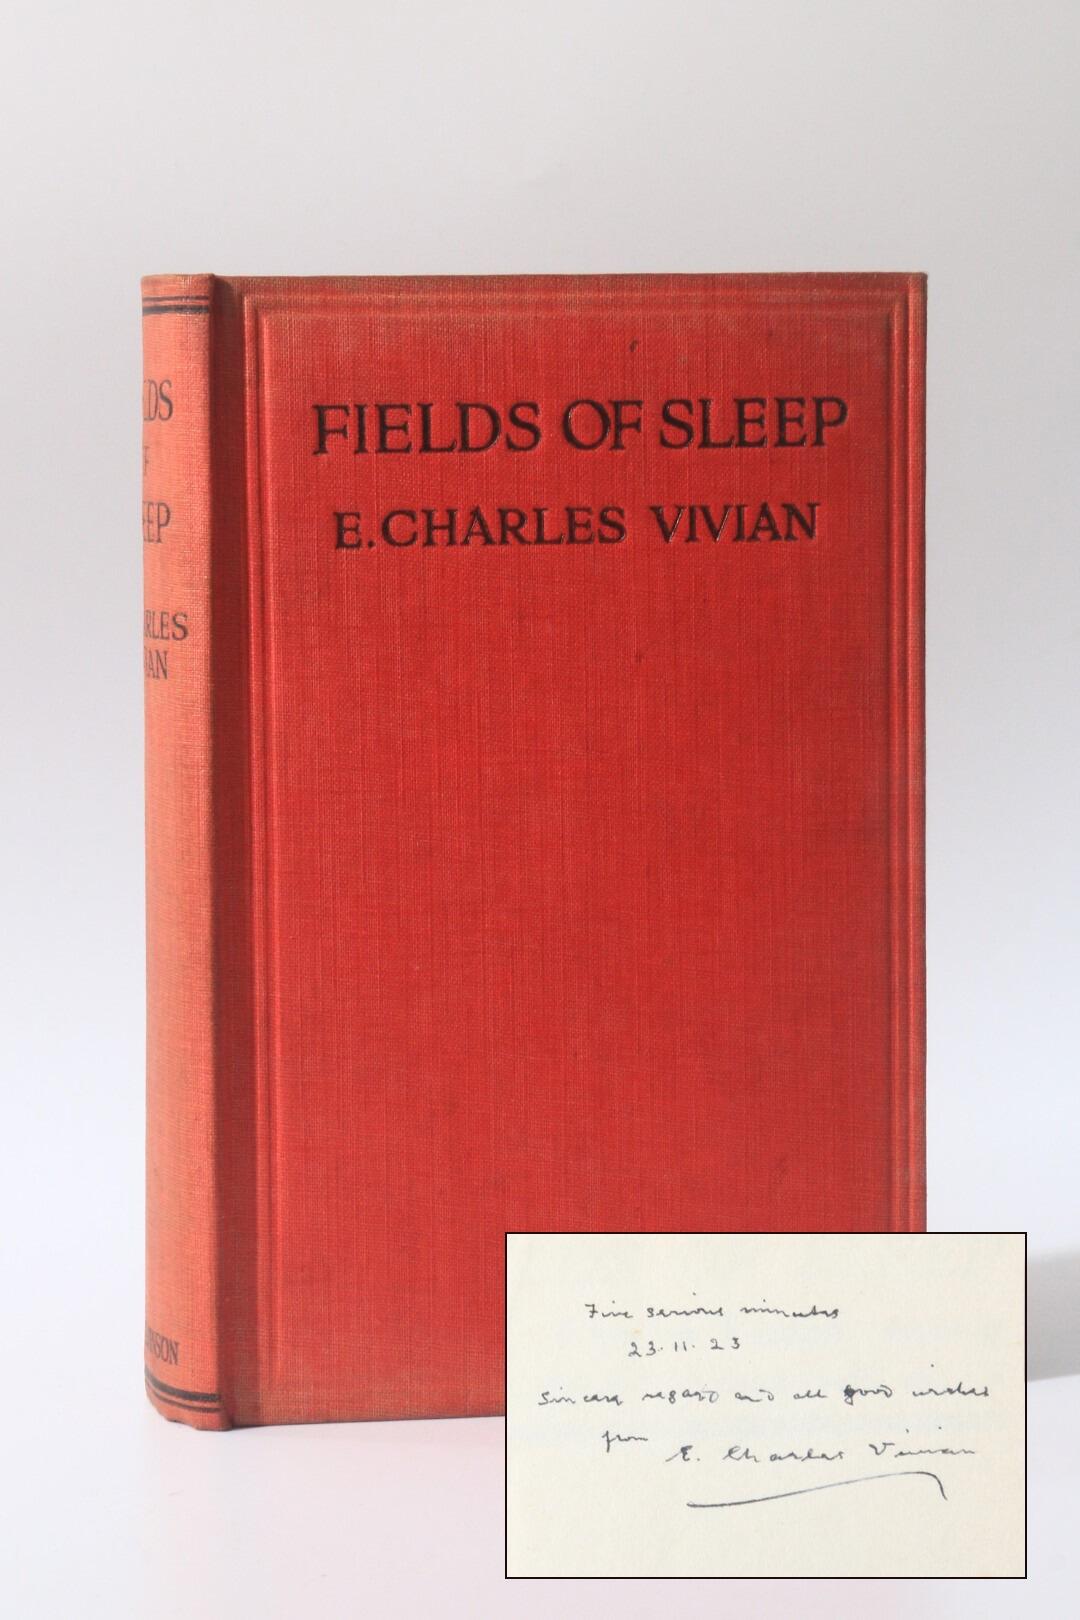 E. Charles Vivian - Fields of Sleep - Hutchinson, nd [1923], Signed First Edition.